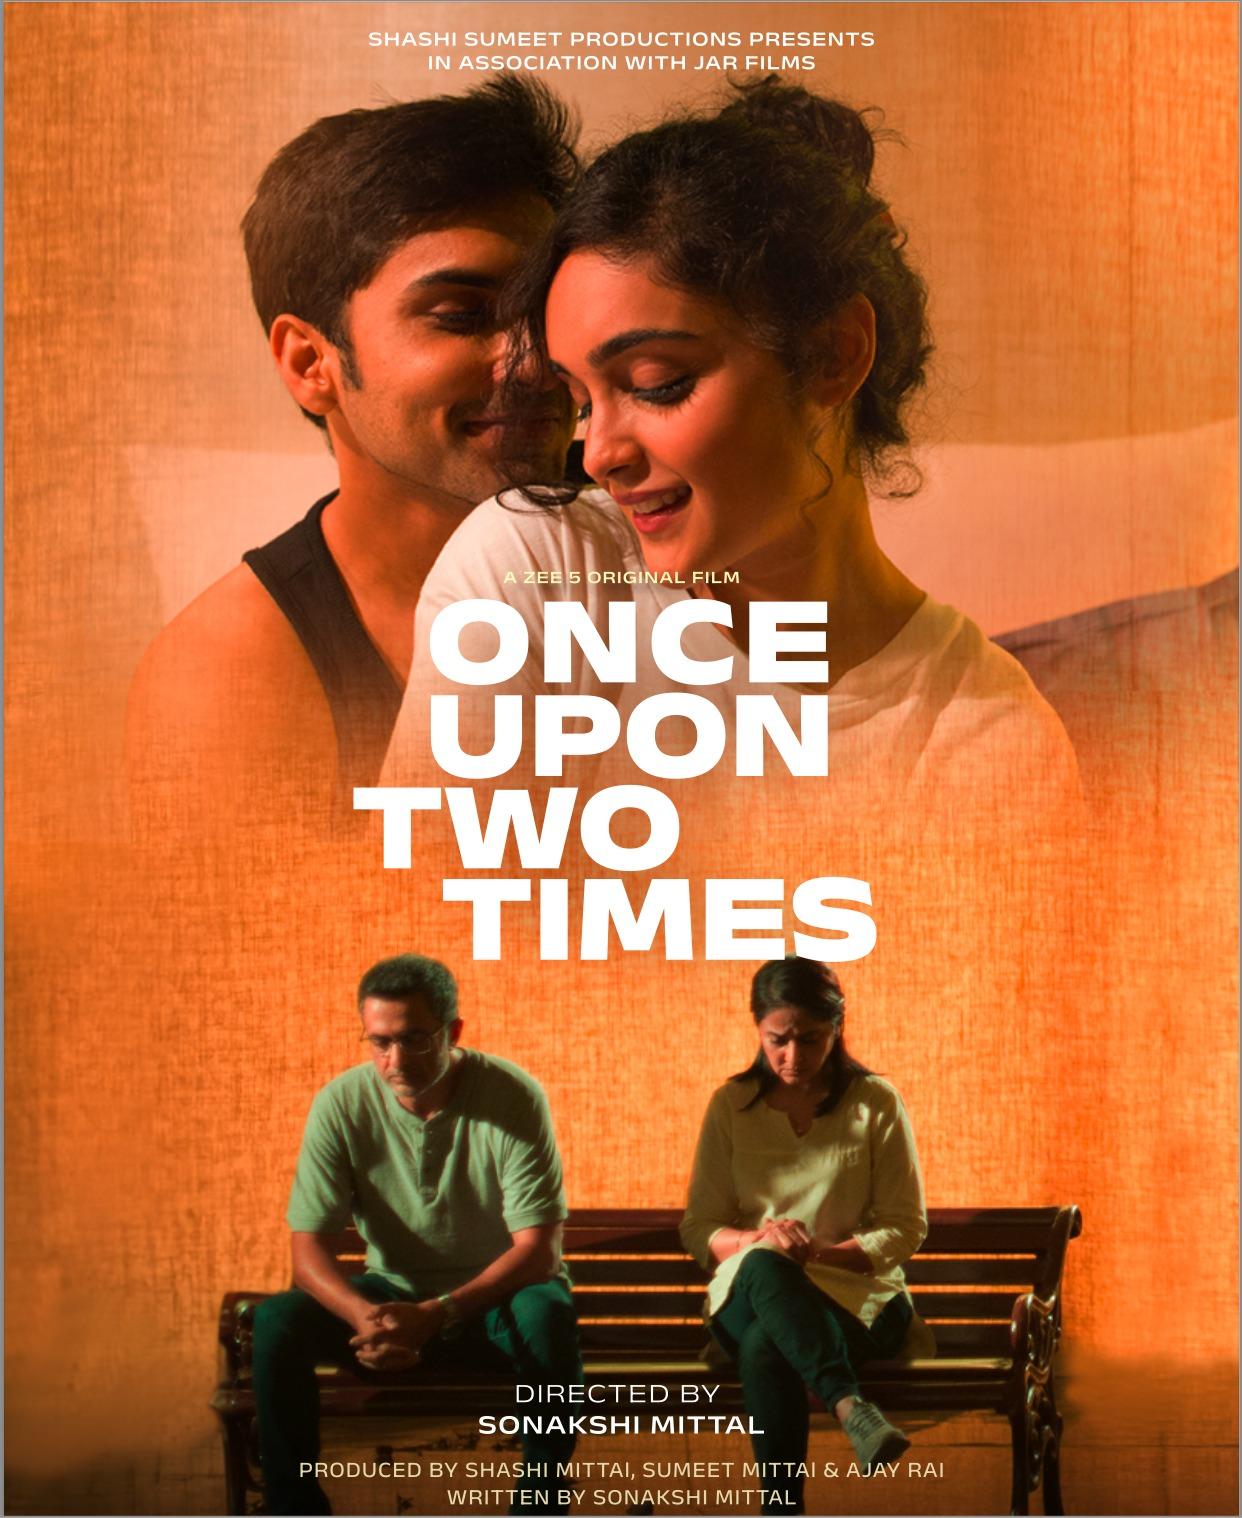 Once Upon Two Times (December 29) - Streaming on ZEE5Once Upon Two Times intertwines the past and present, narrating Ruhi and Ahaan's journey amid revelations about their parents' romantic history, casting doubts on their own love story.